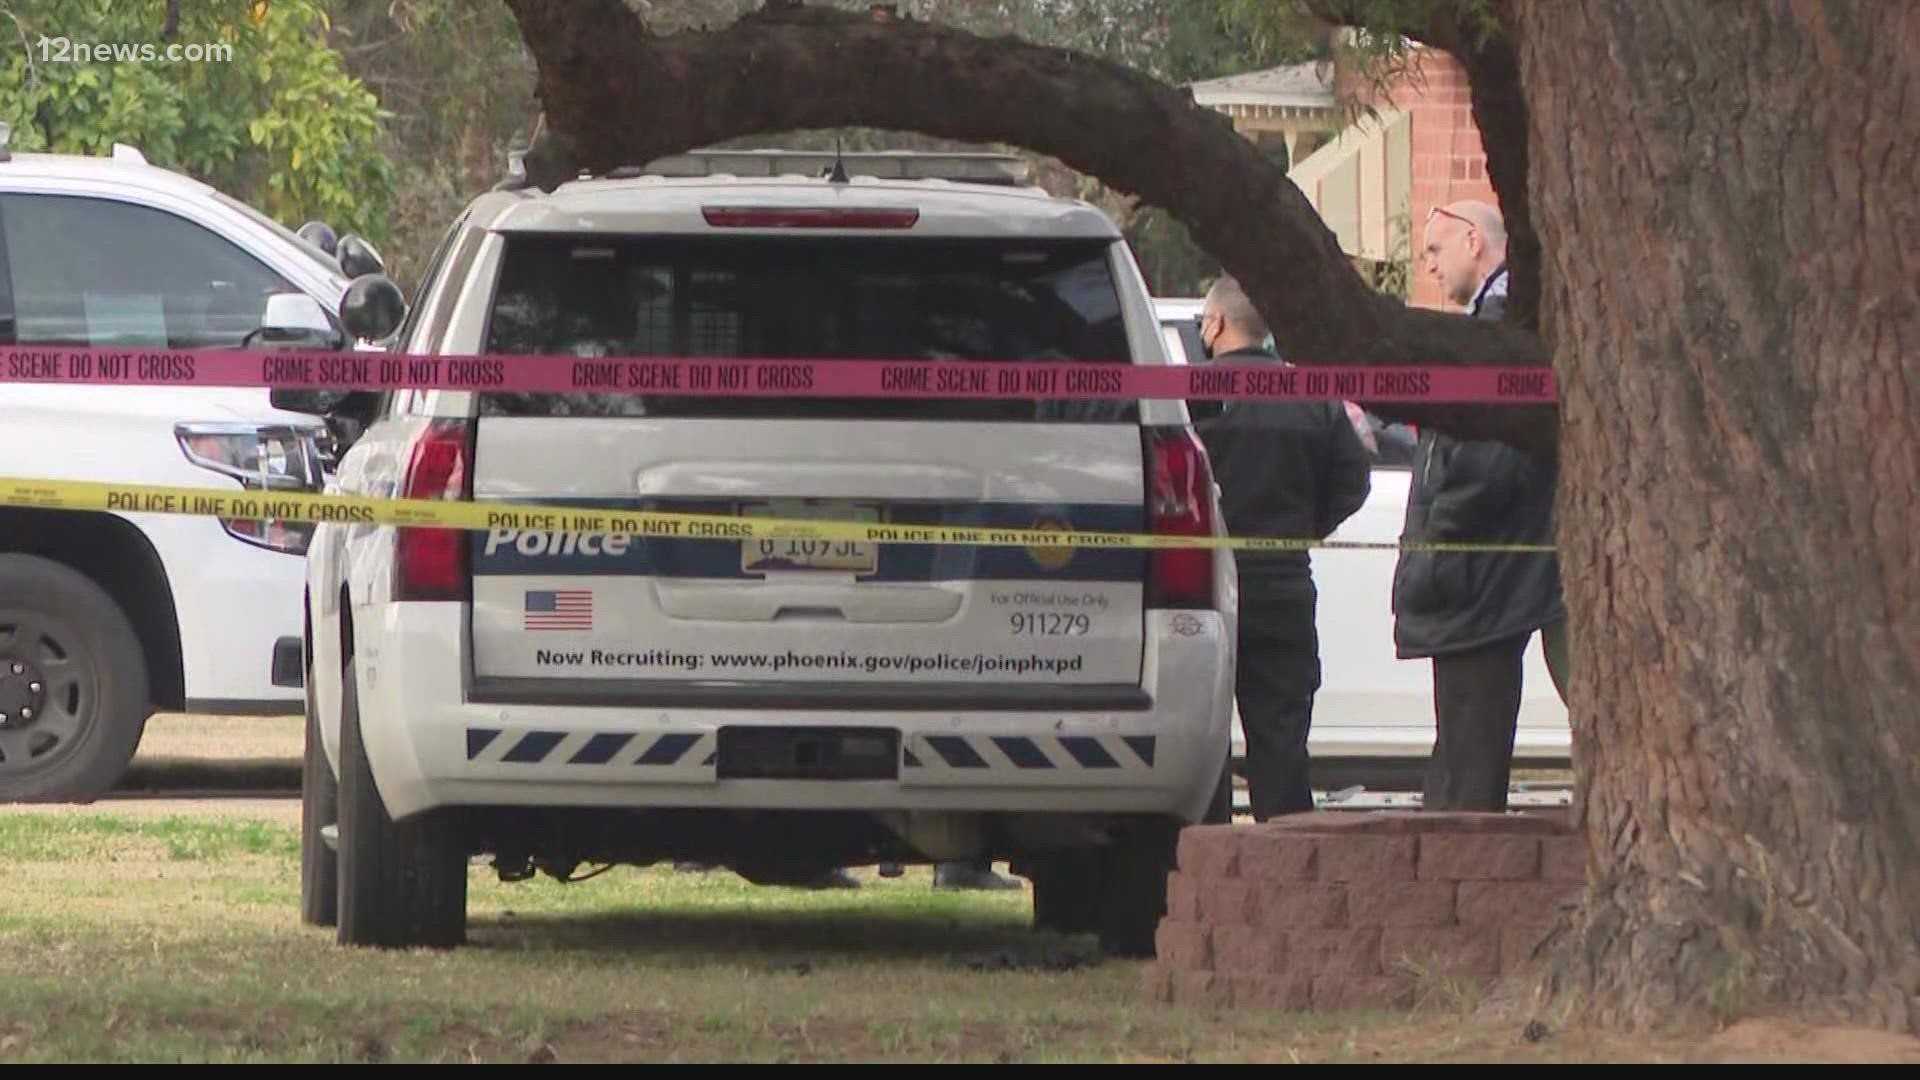 A man is dead after Phoenix police officers shot him during a barricaded incident in central Phoenix Saturday, authorities said.